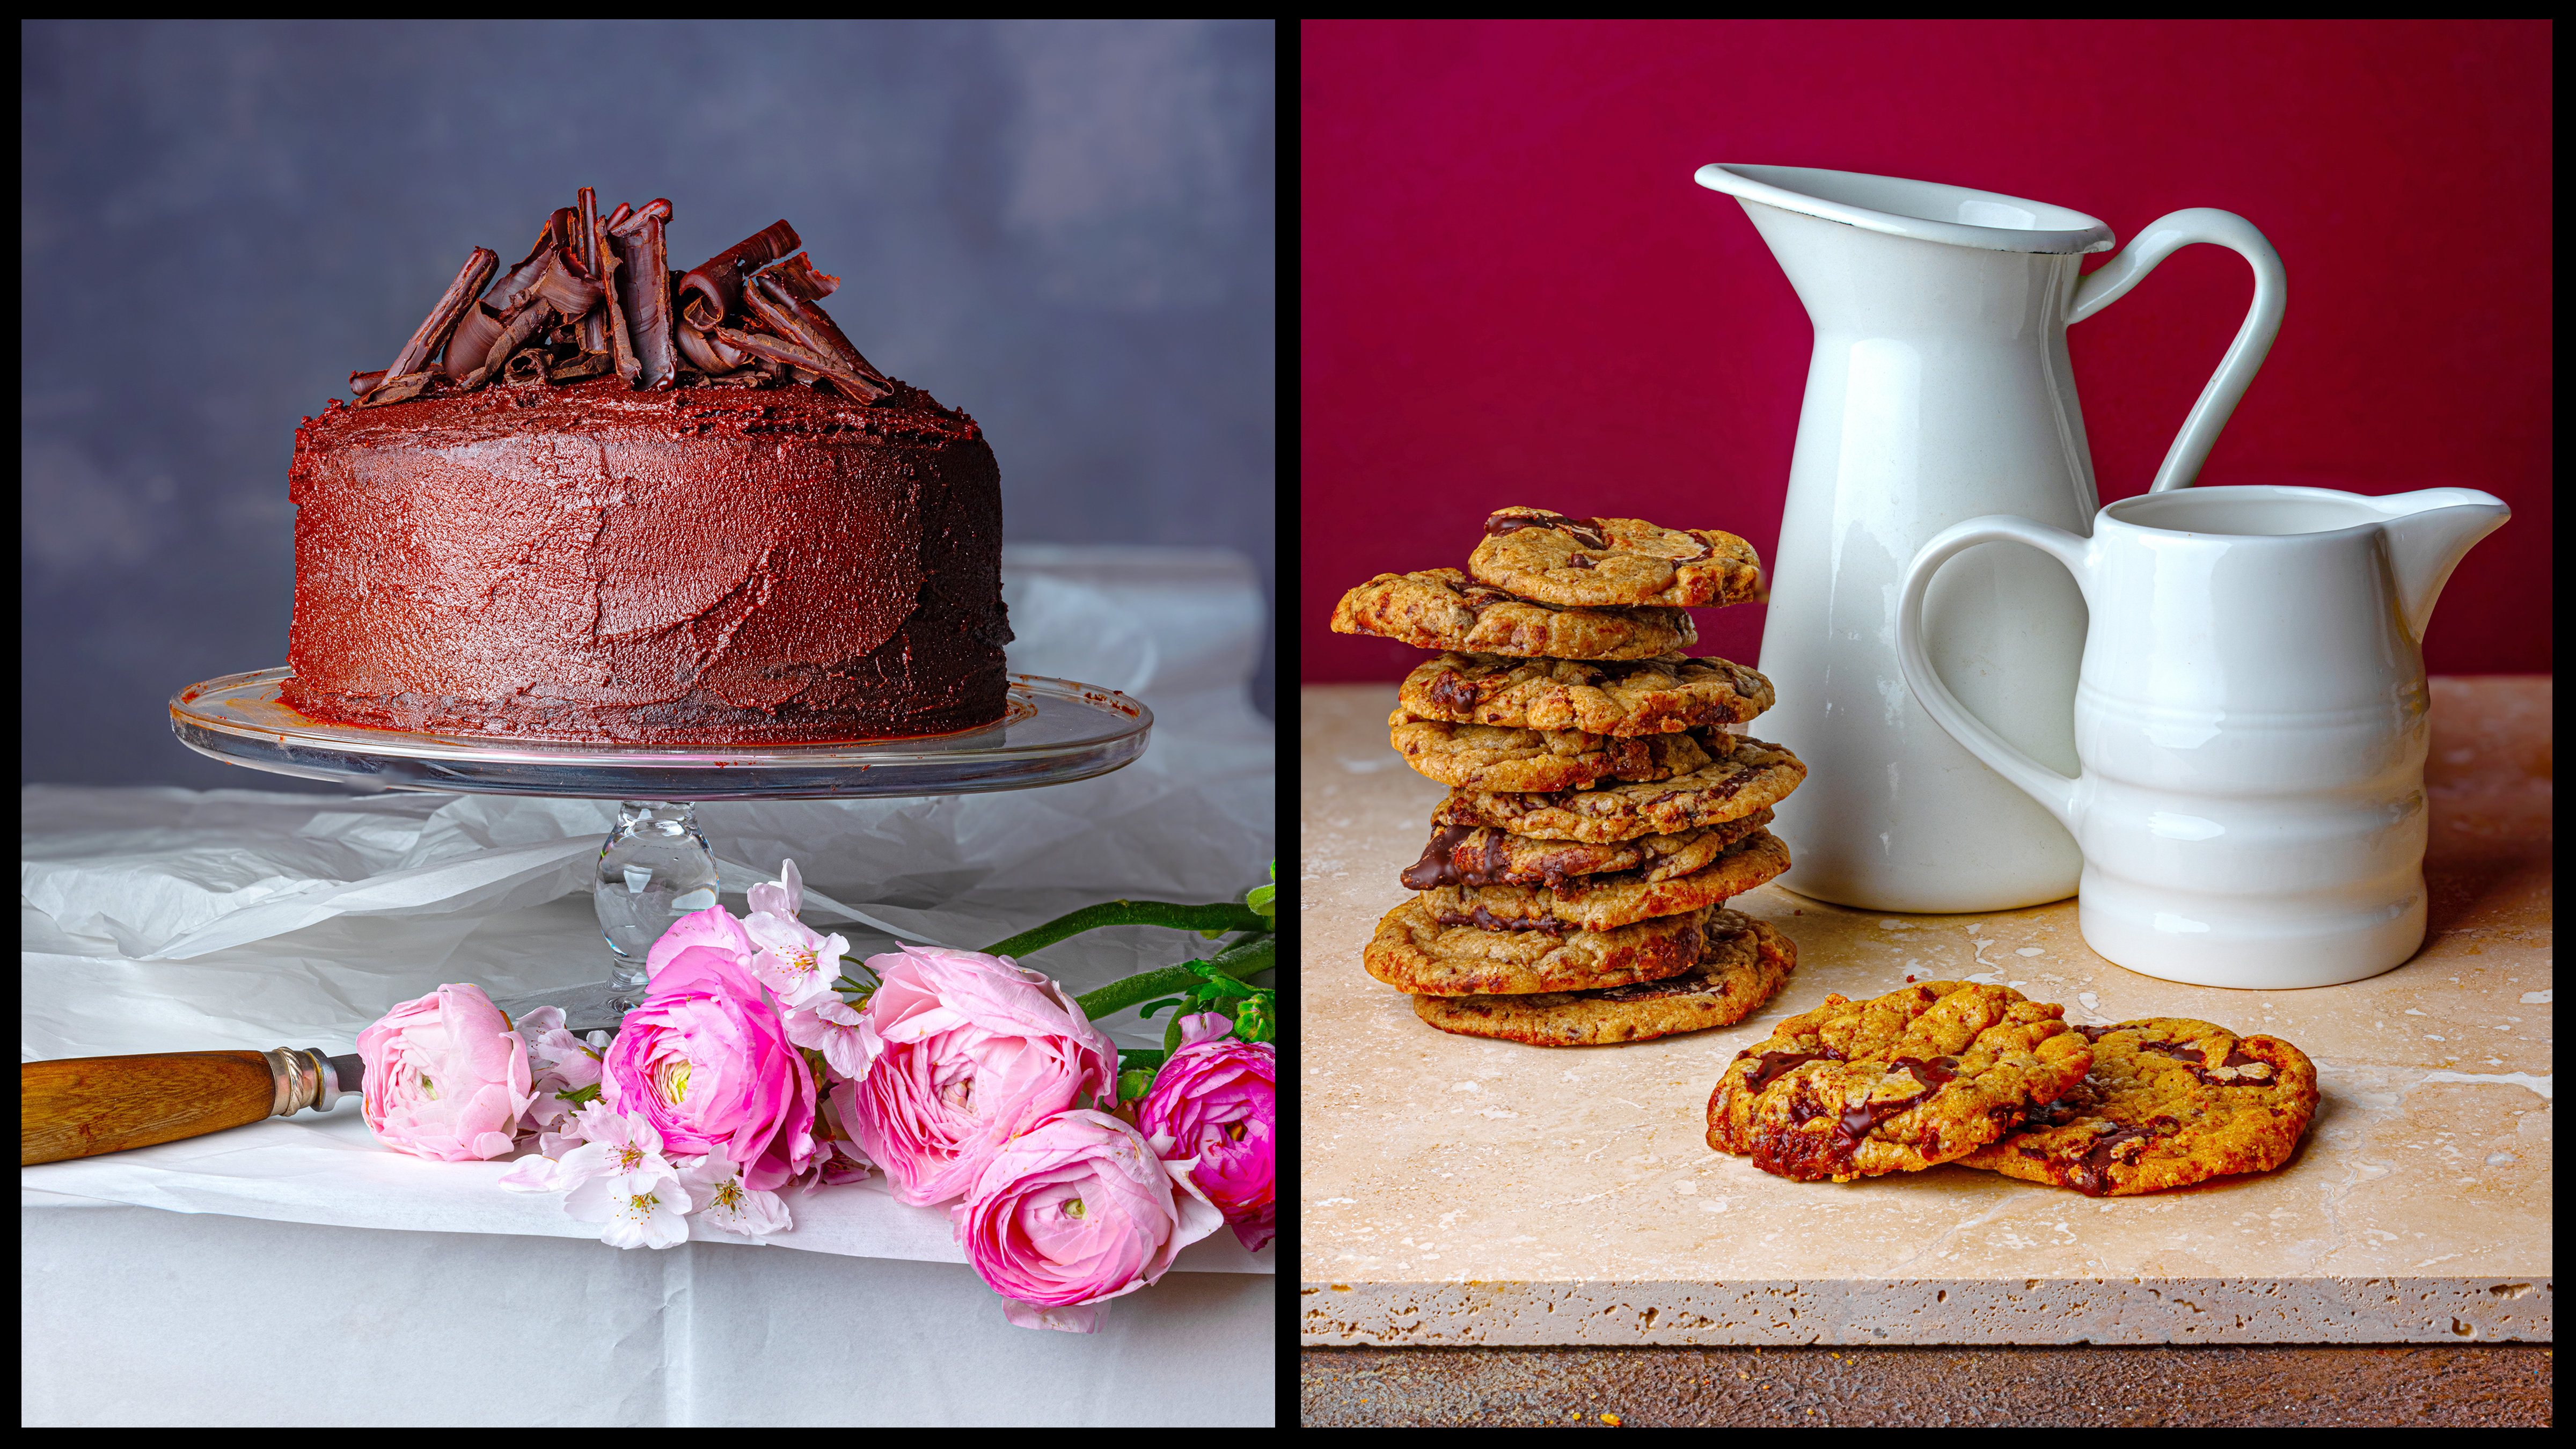 Prue Leith’s devil’s food cake and Rahul Mandal’s easiest chocolate chip cookies